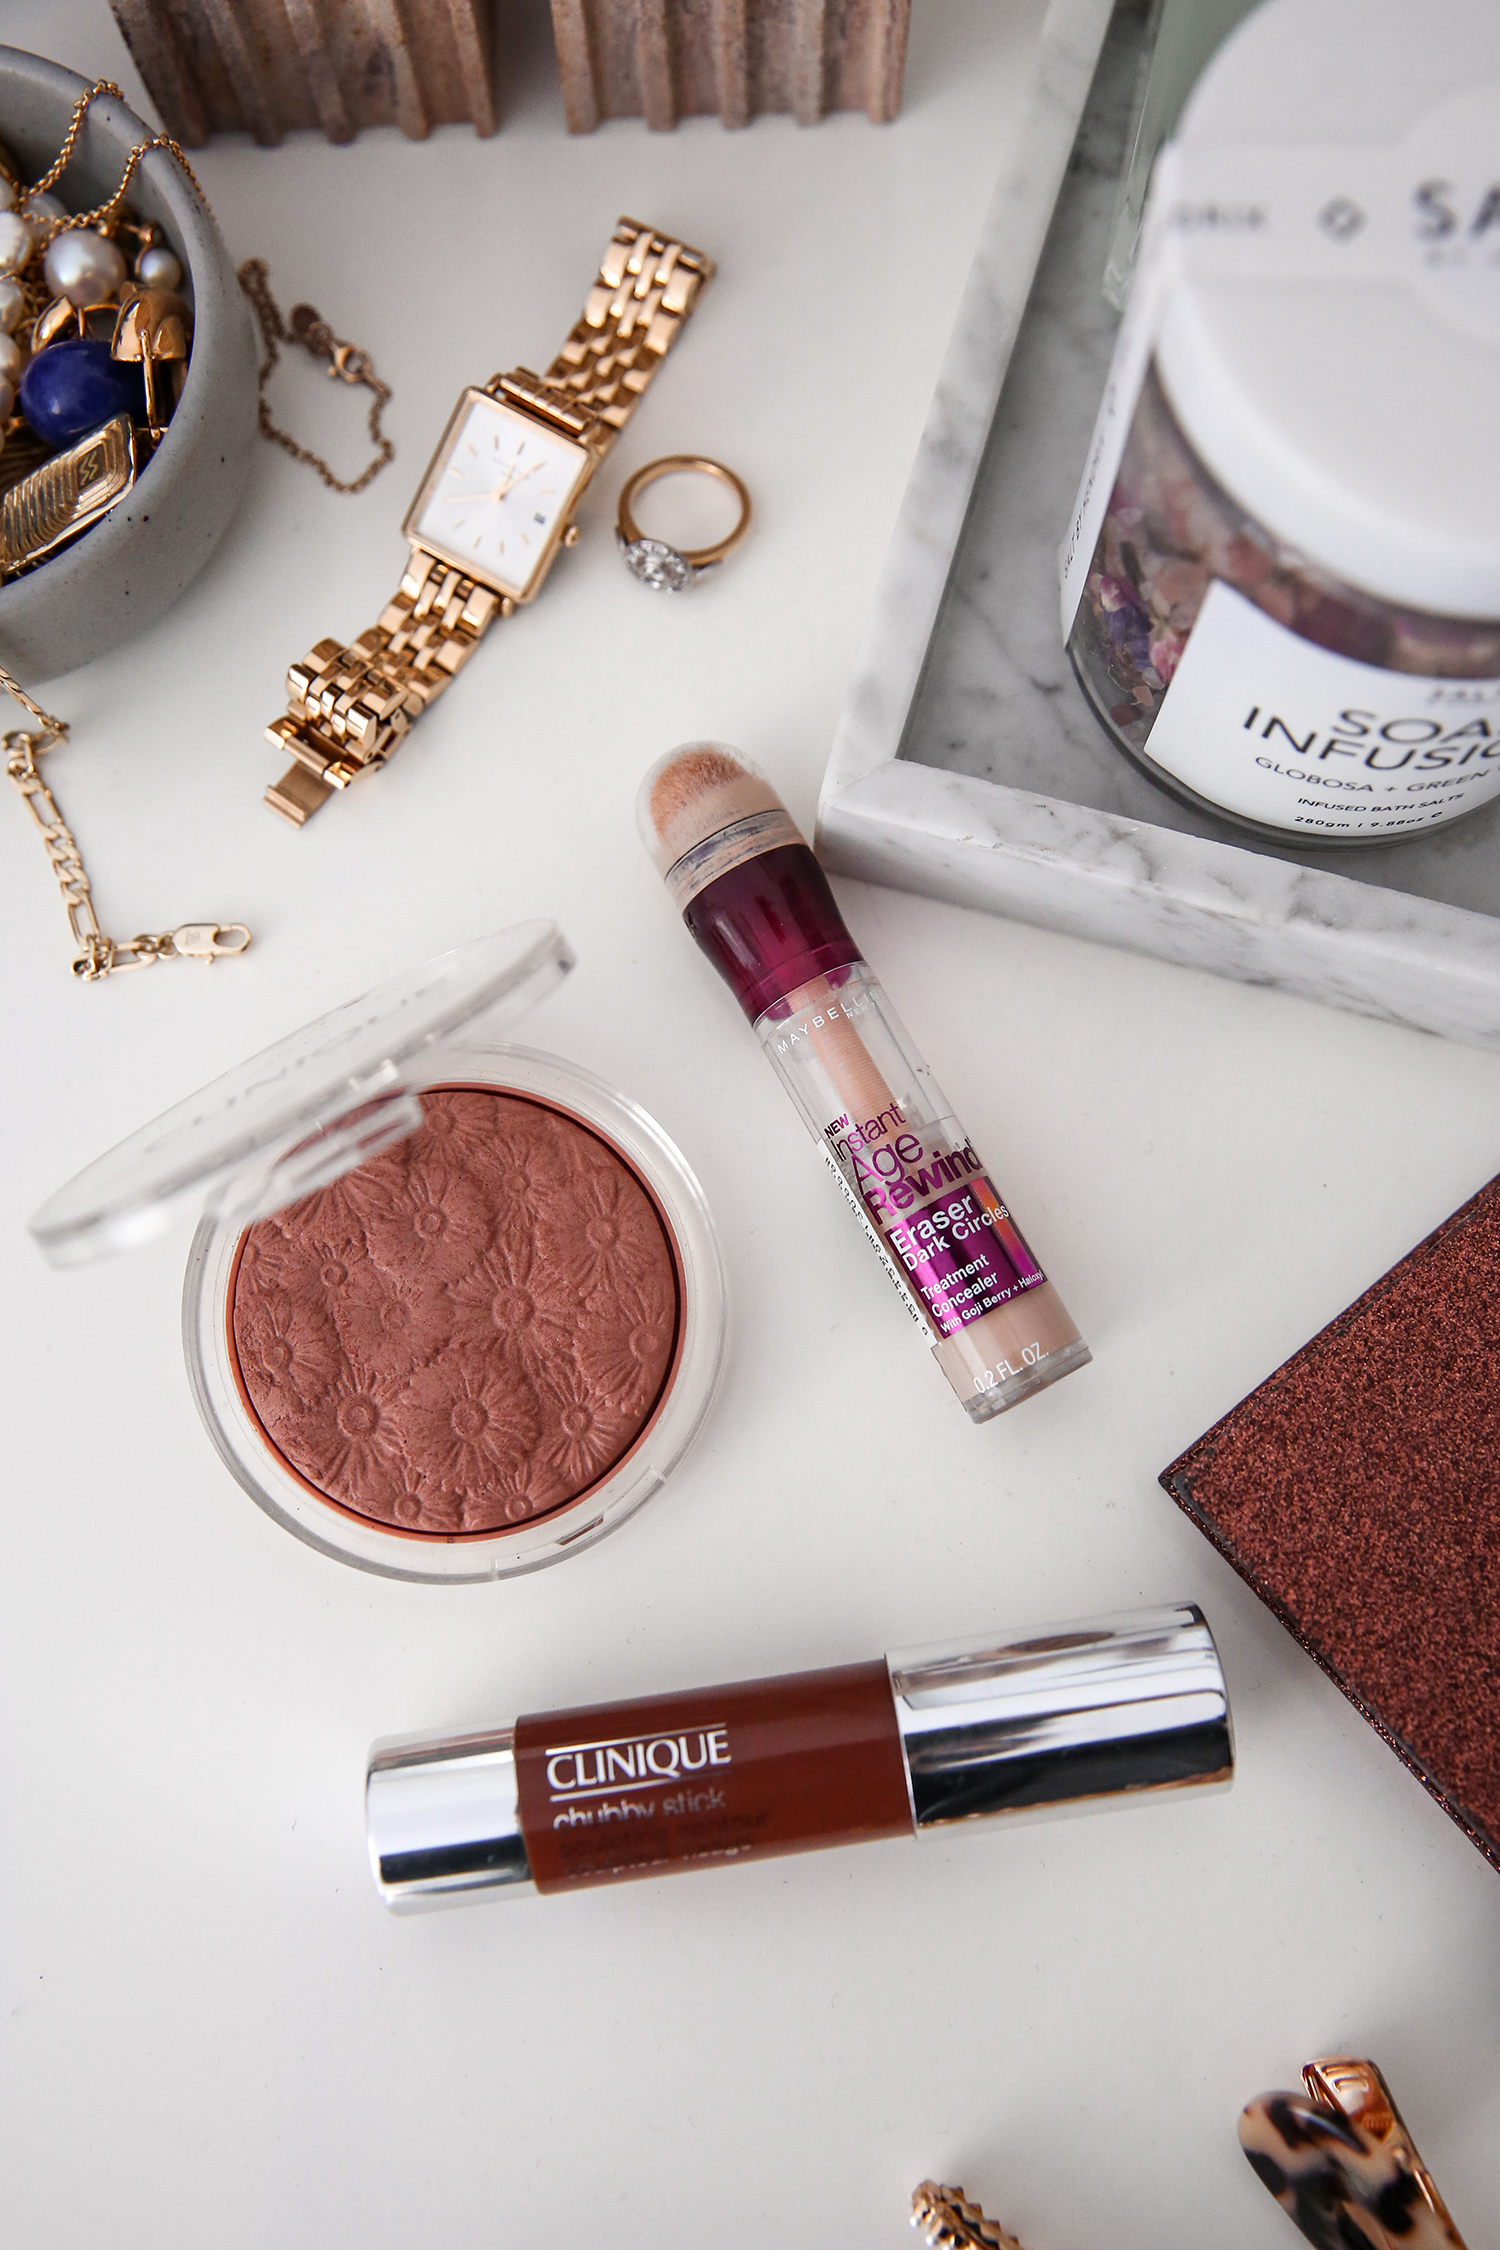 The 7 Makeup Products I have on rotation